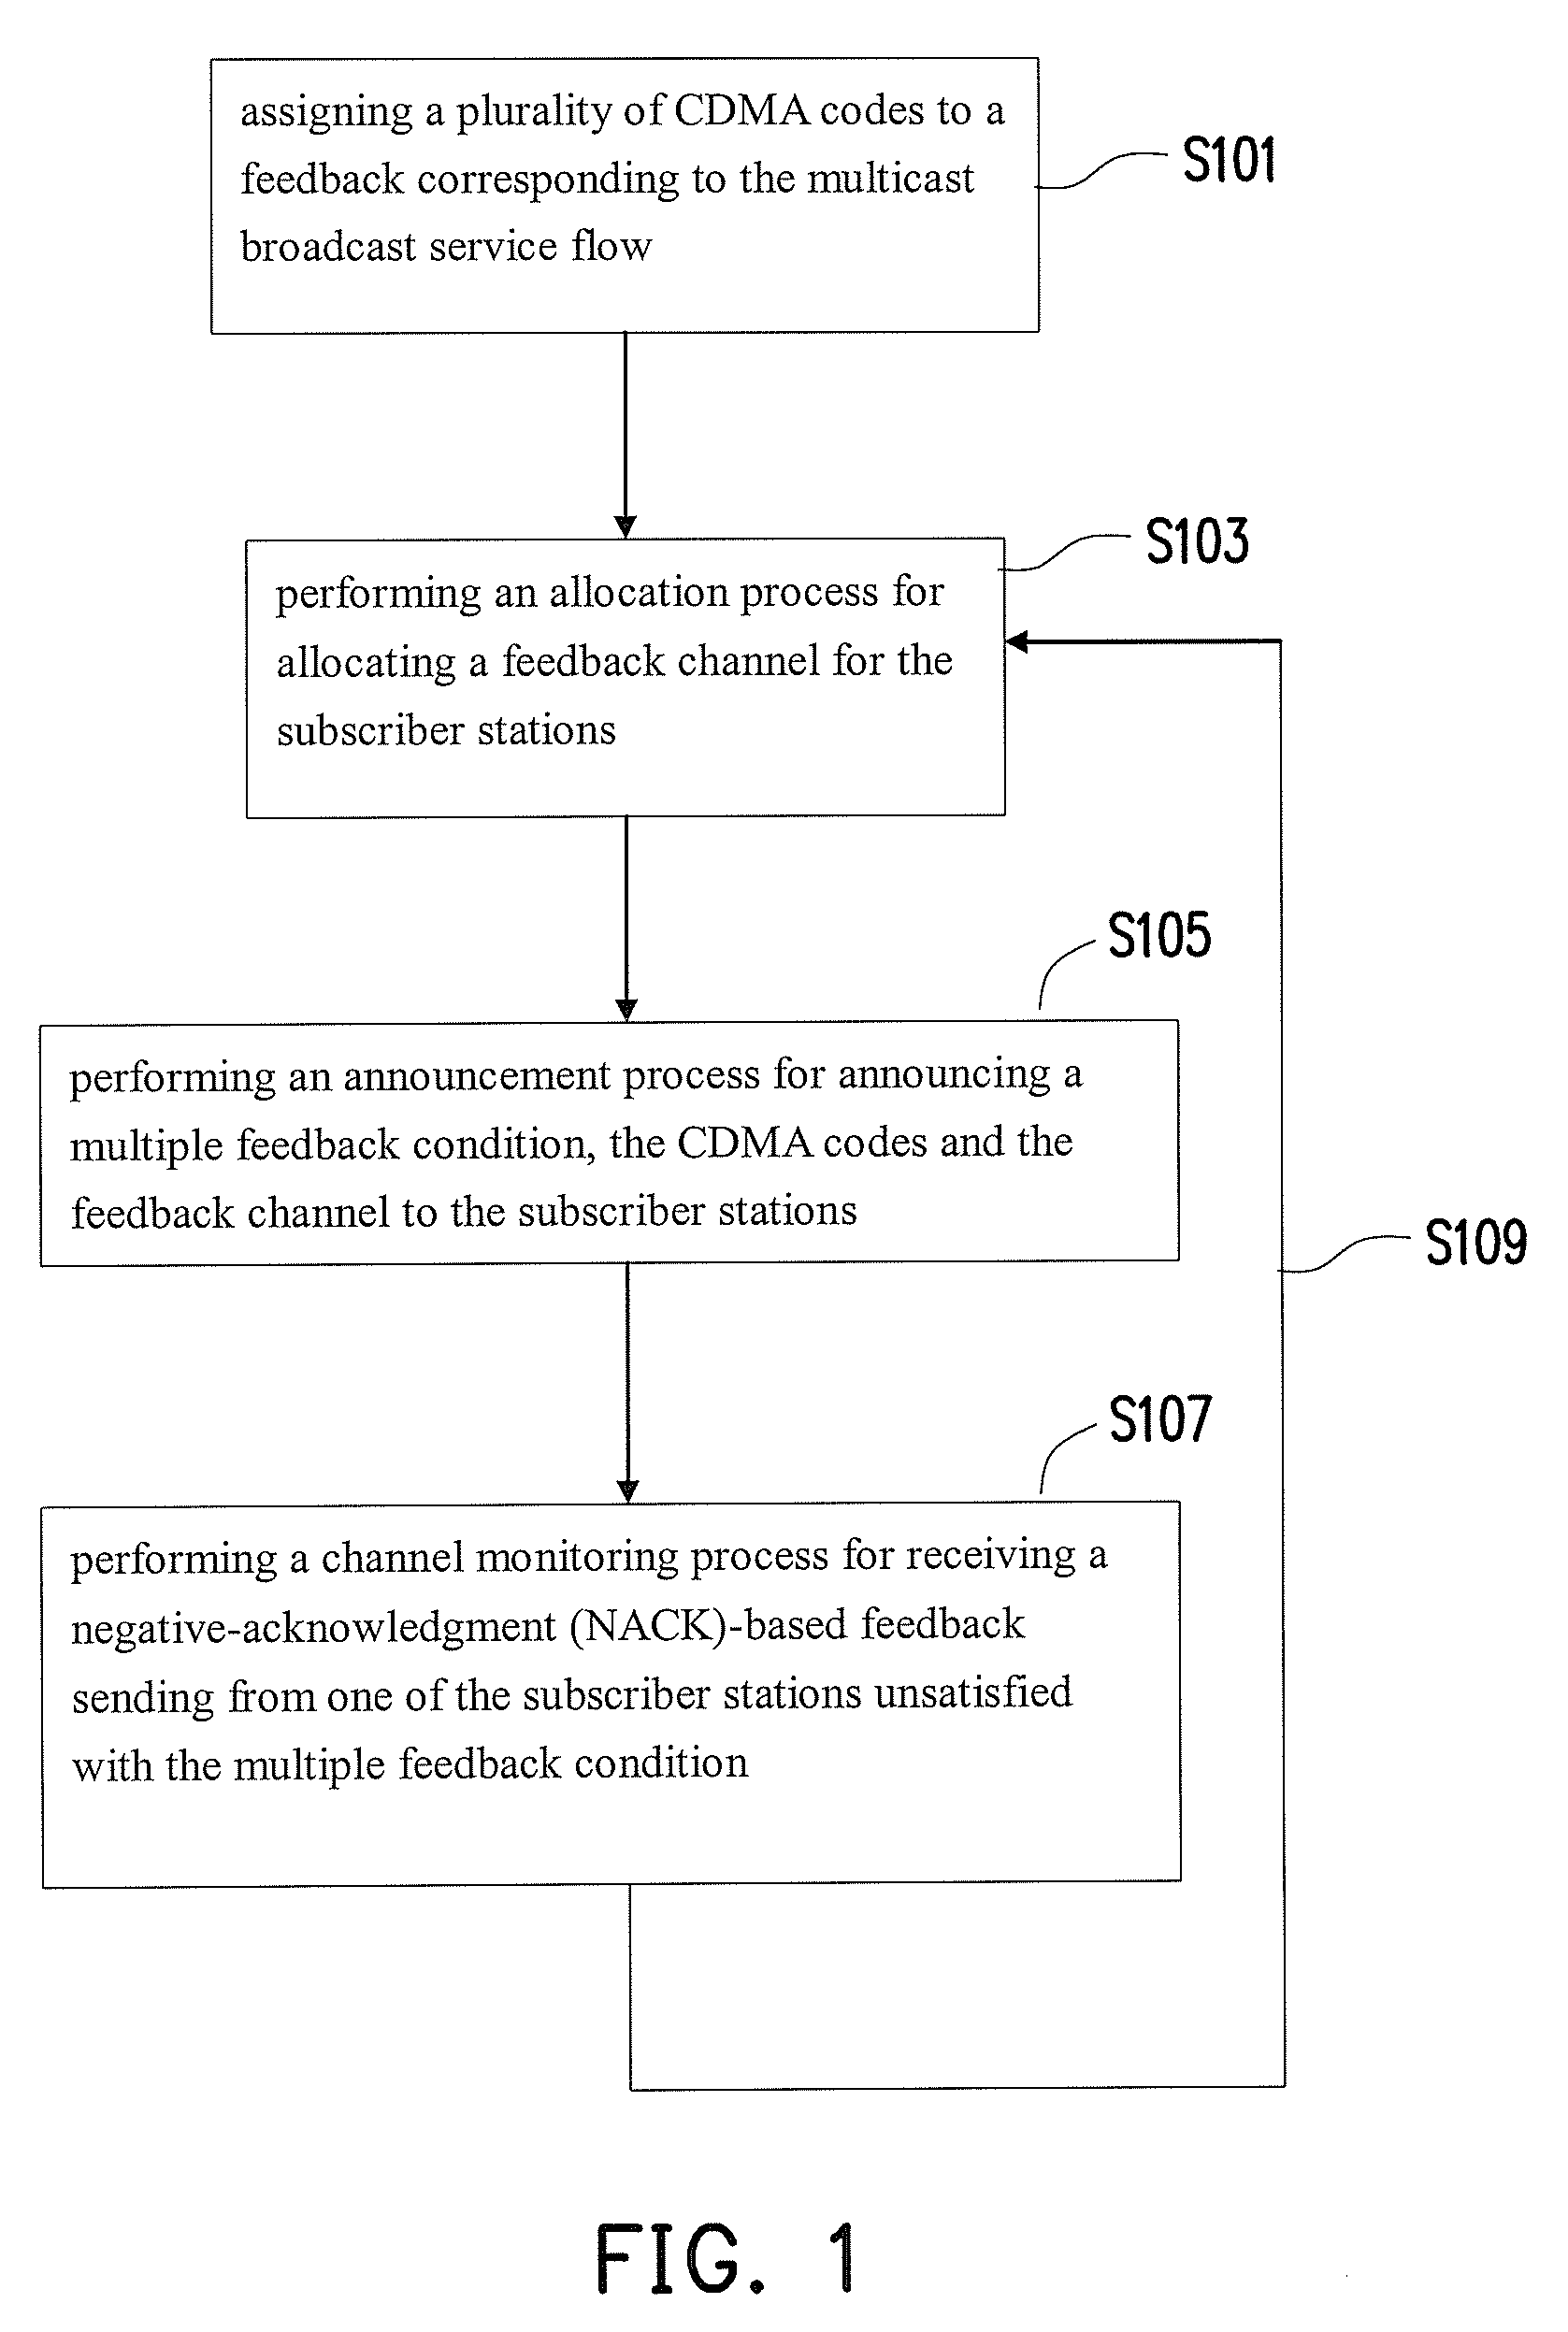 Method and apparatus for receiving feedback corresponding to multicast broadcast service